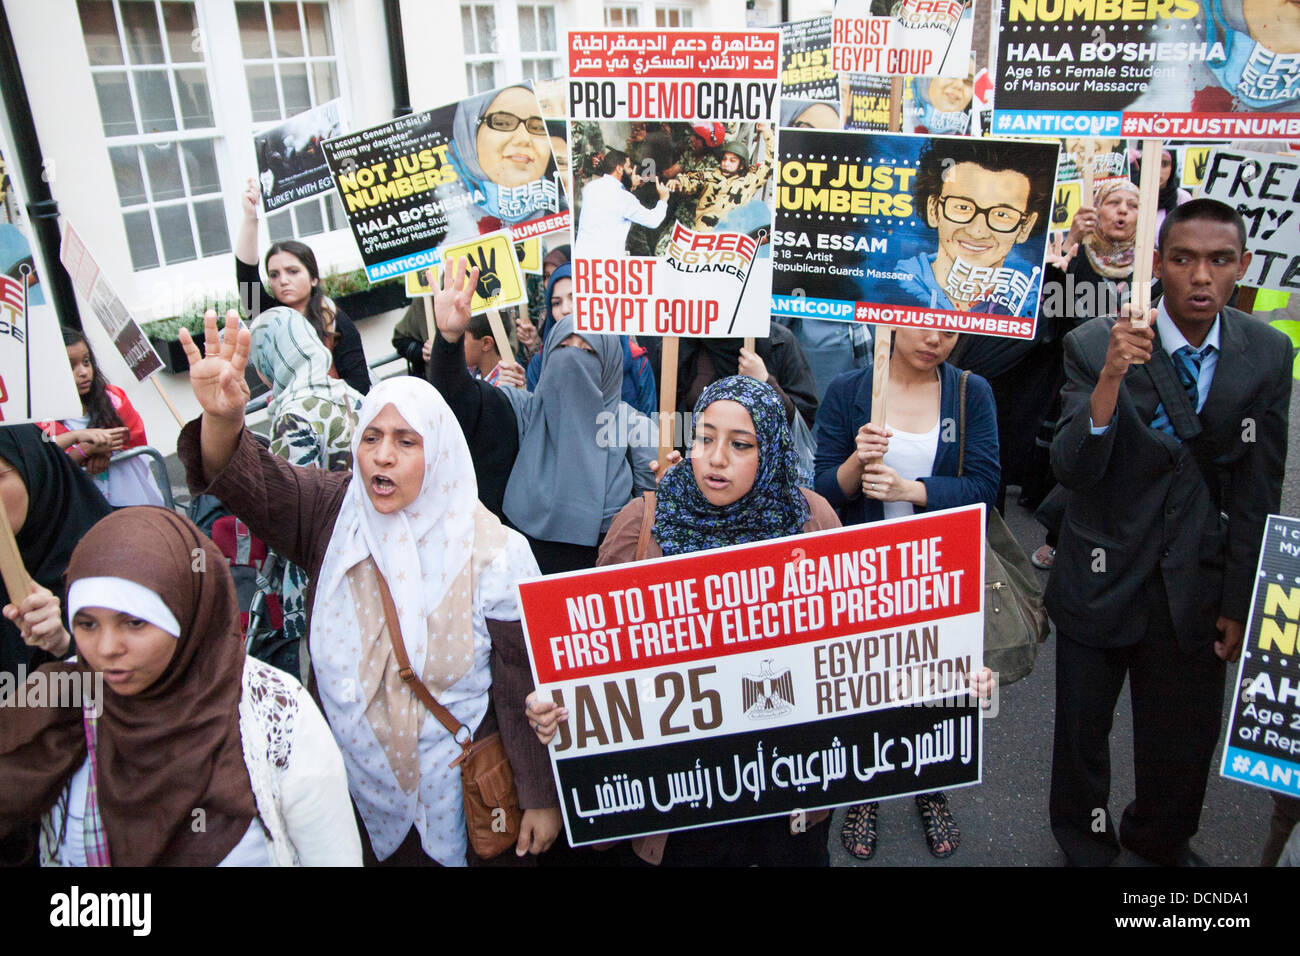 London, 20-08-2013. outside the Egyptian embassy as part of ongoing protests against the military takeover of ousted President Morsi's democratically elected government. Stock Photo